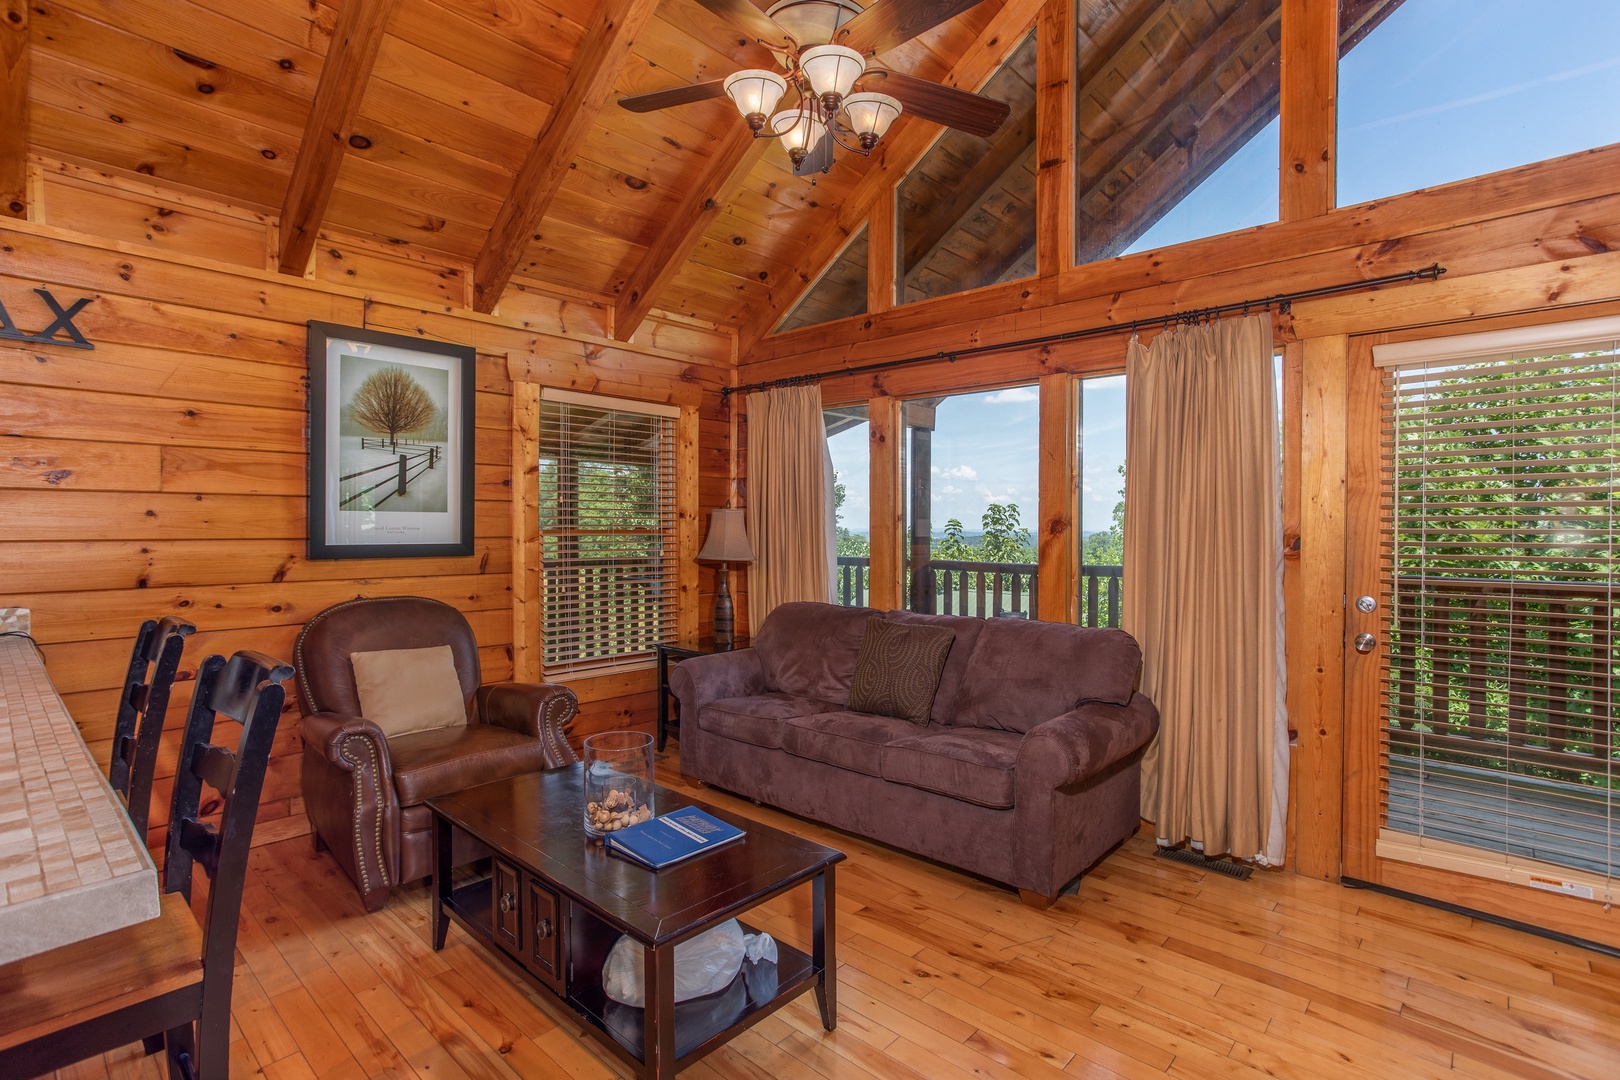 Seating area off the main living room at Majestic Sunrise, a 1 bedroom cabin rental located in Pigeon Forge